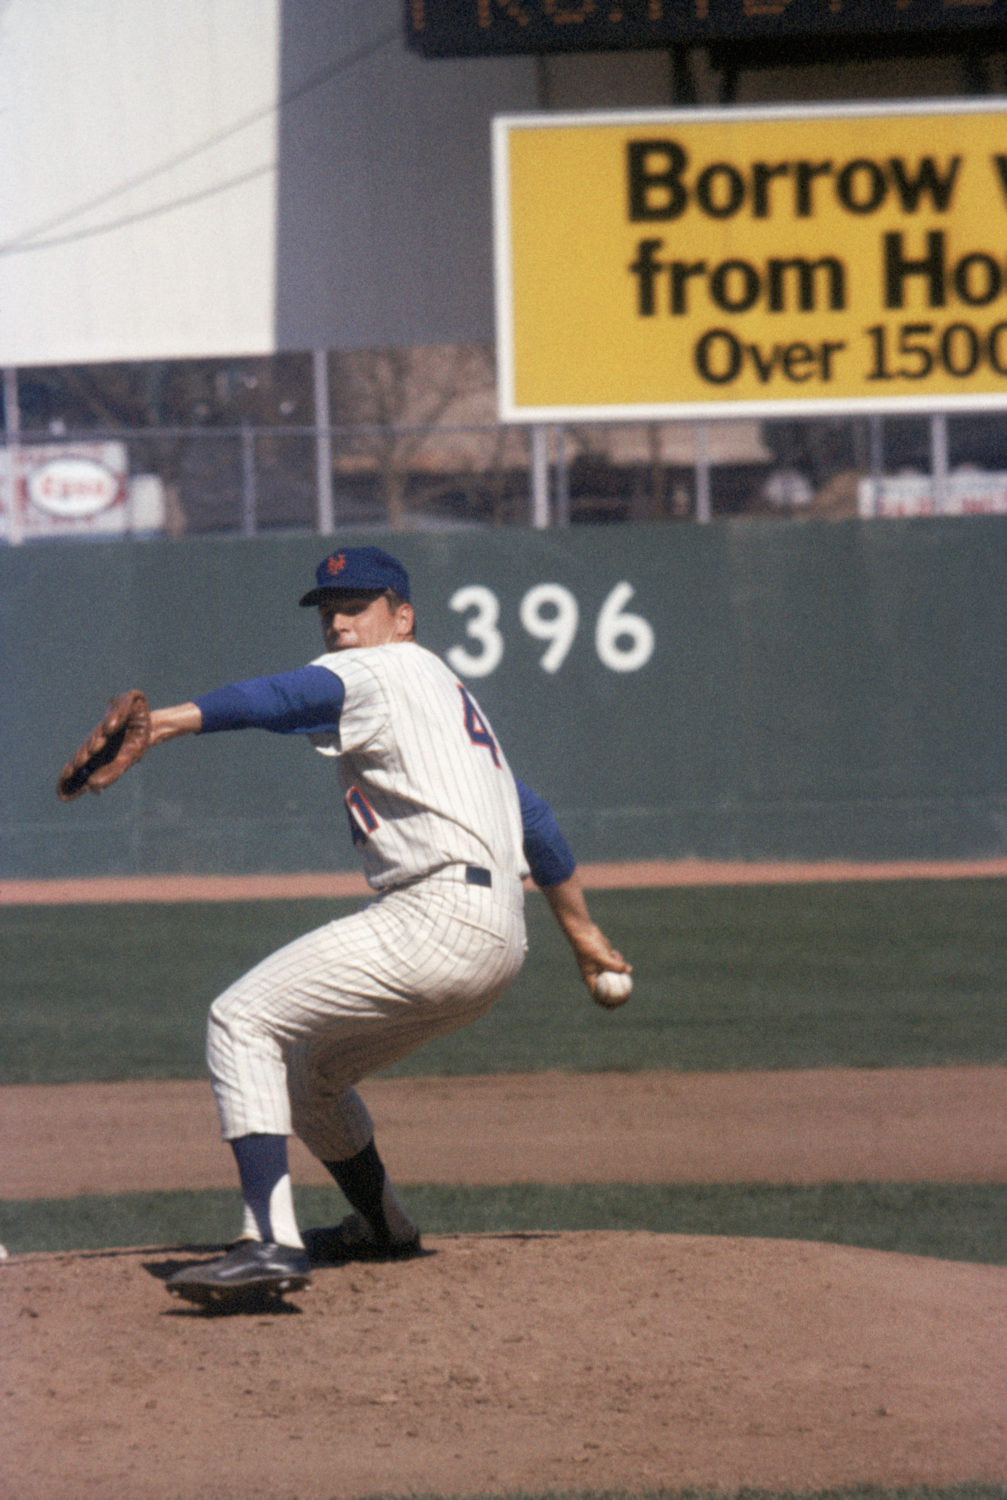 Seaver Pitches as He Strikes Out 13 Batters in Game 1 of NLCS